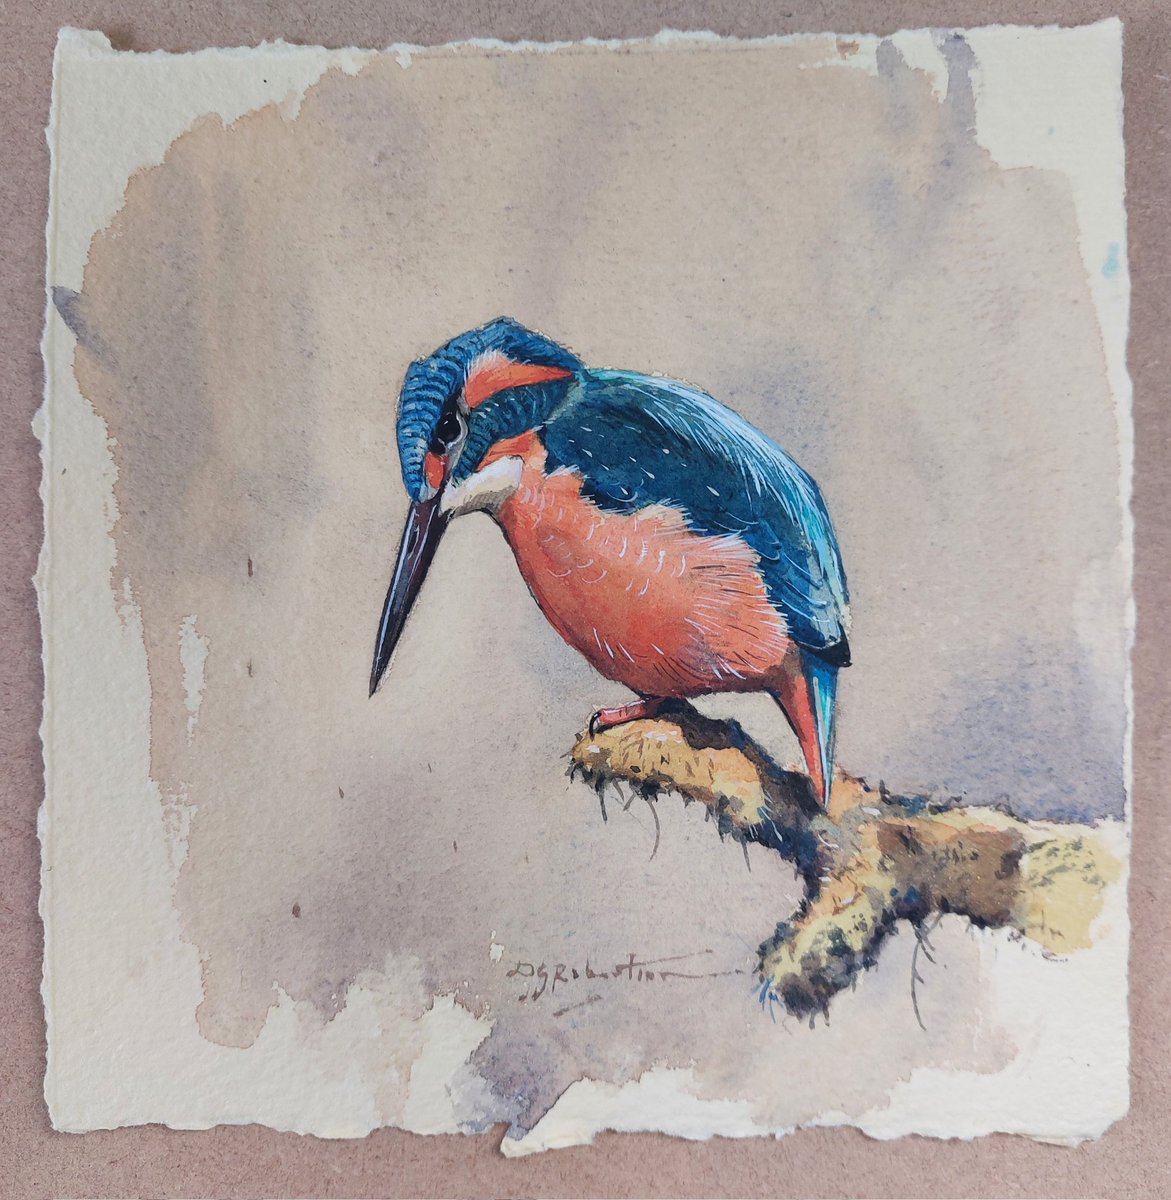 Nice day for a plunge into a cold pool..'Kingfisher' painted from life in my trip up Speyside last week. Watercolour on Two Rivers Paper 

#kingfisher #birdart # astilllifestyle #moodcollection #birdwatchers #markmakingdaily #artonpaper #inspiredbynature #artoftheday #fisher